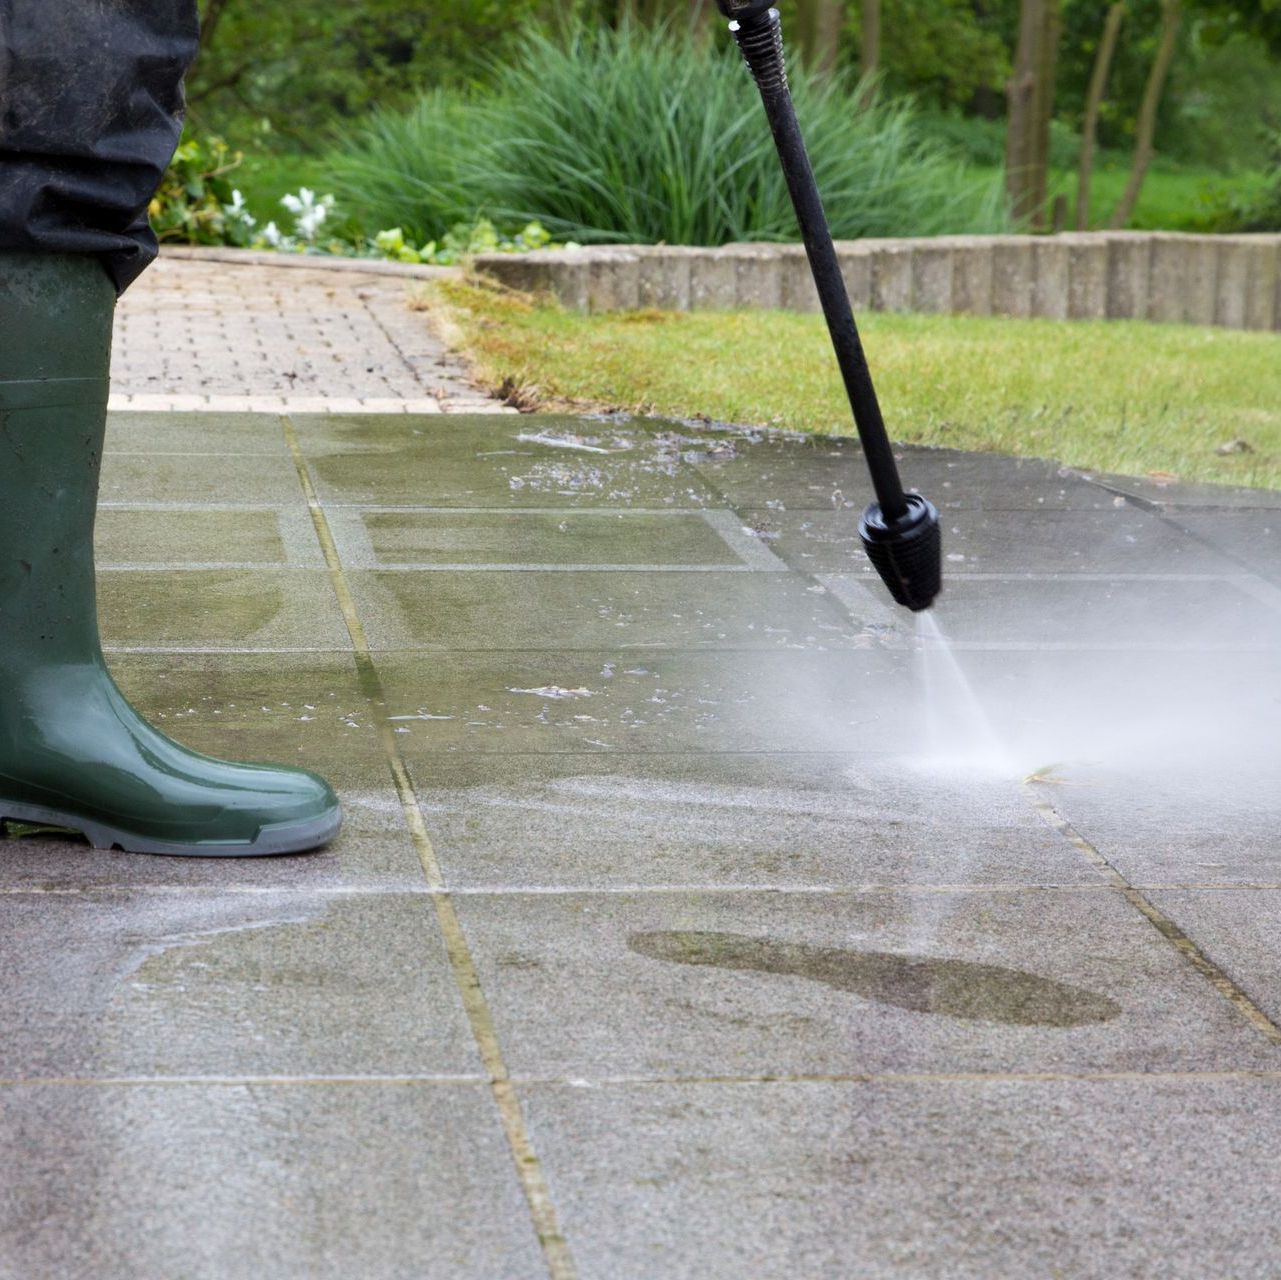 a person is using a high pressure washer to clean a concrete path